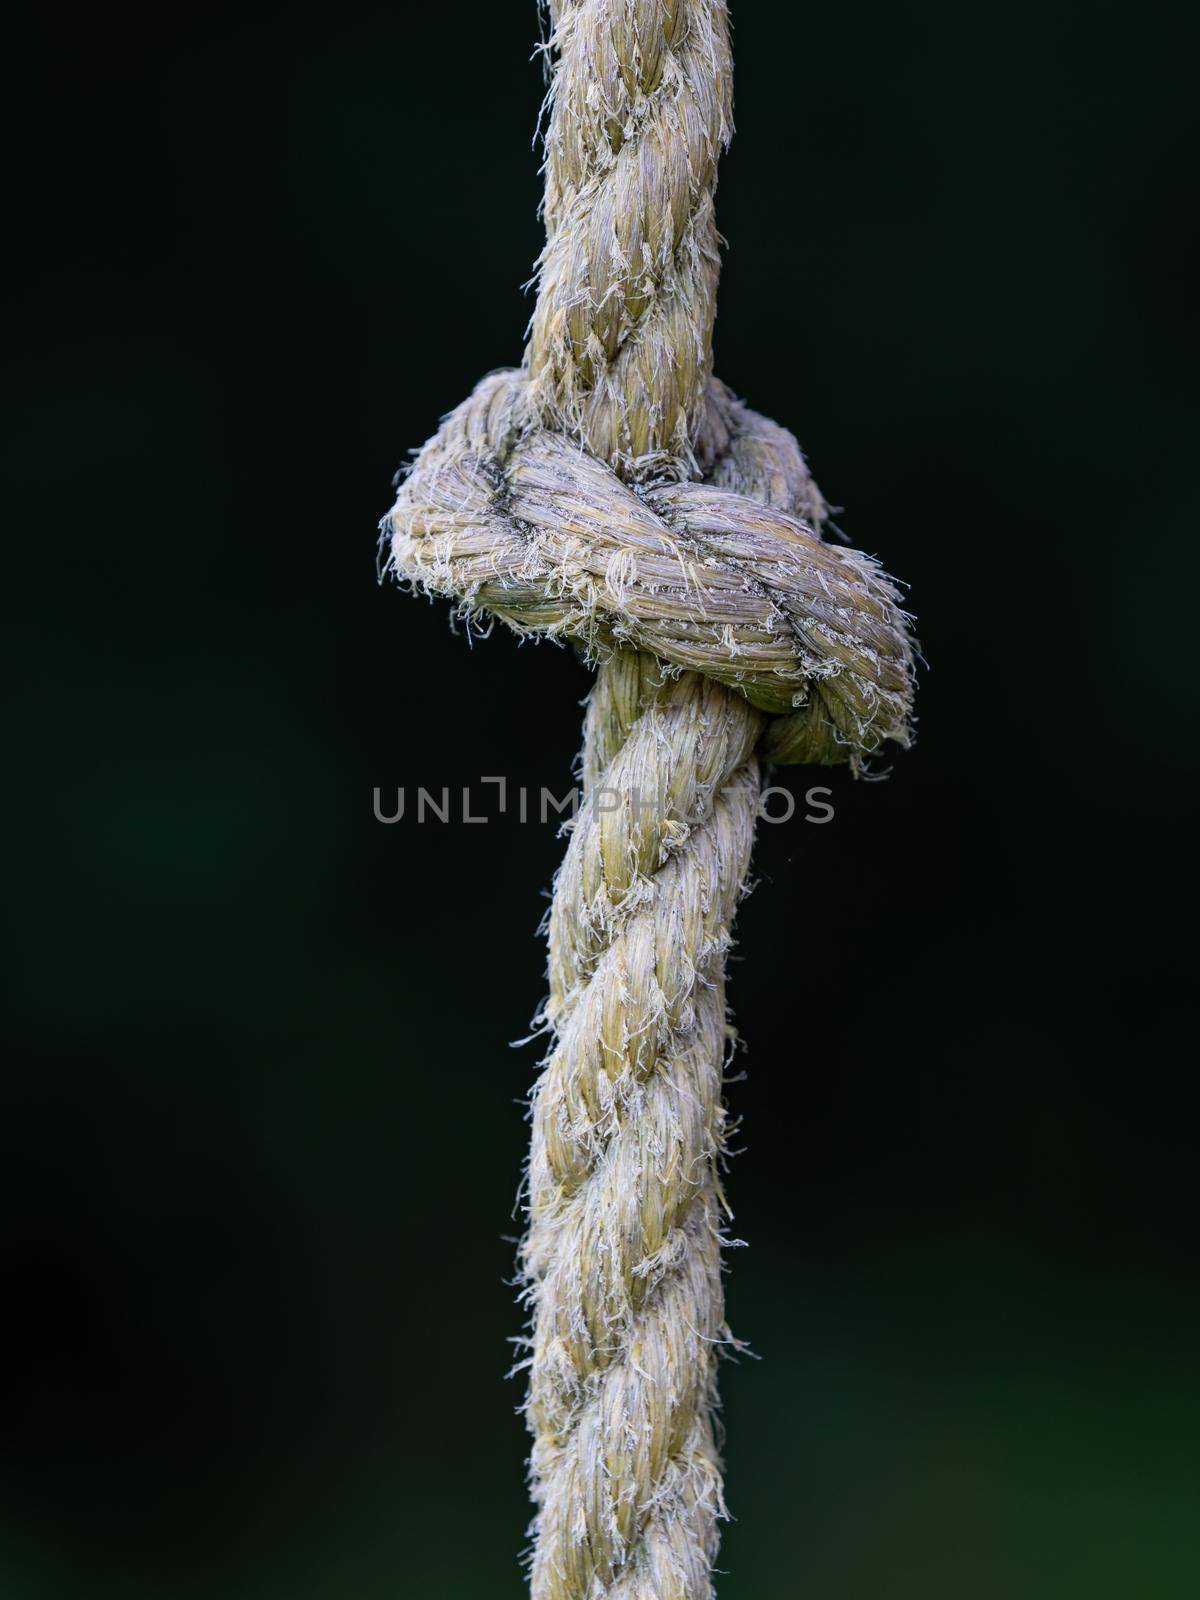 Rope ring knot hanging on wooden beam, trees in background by rdonar2